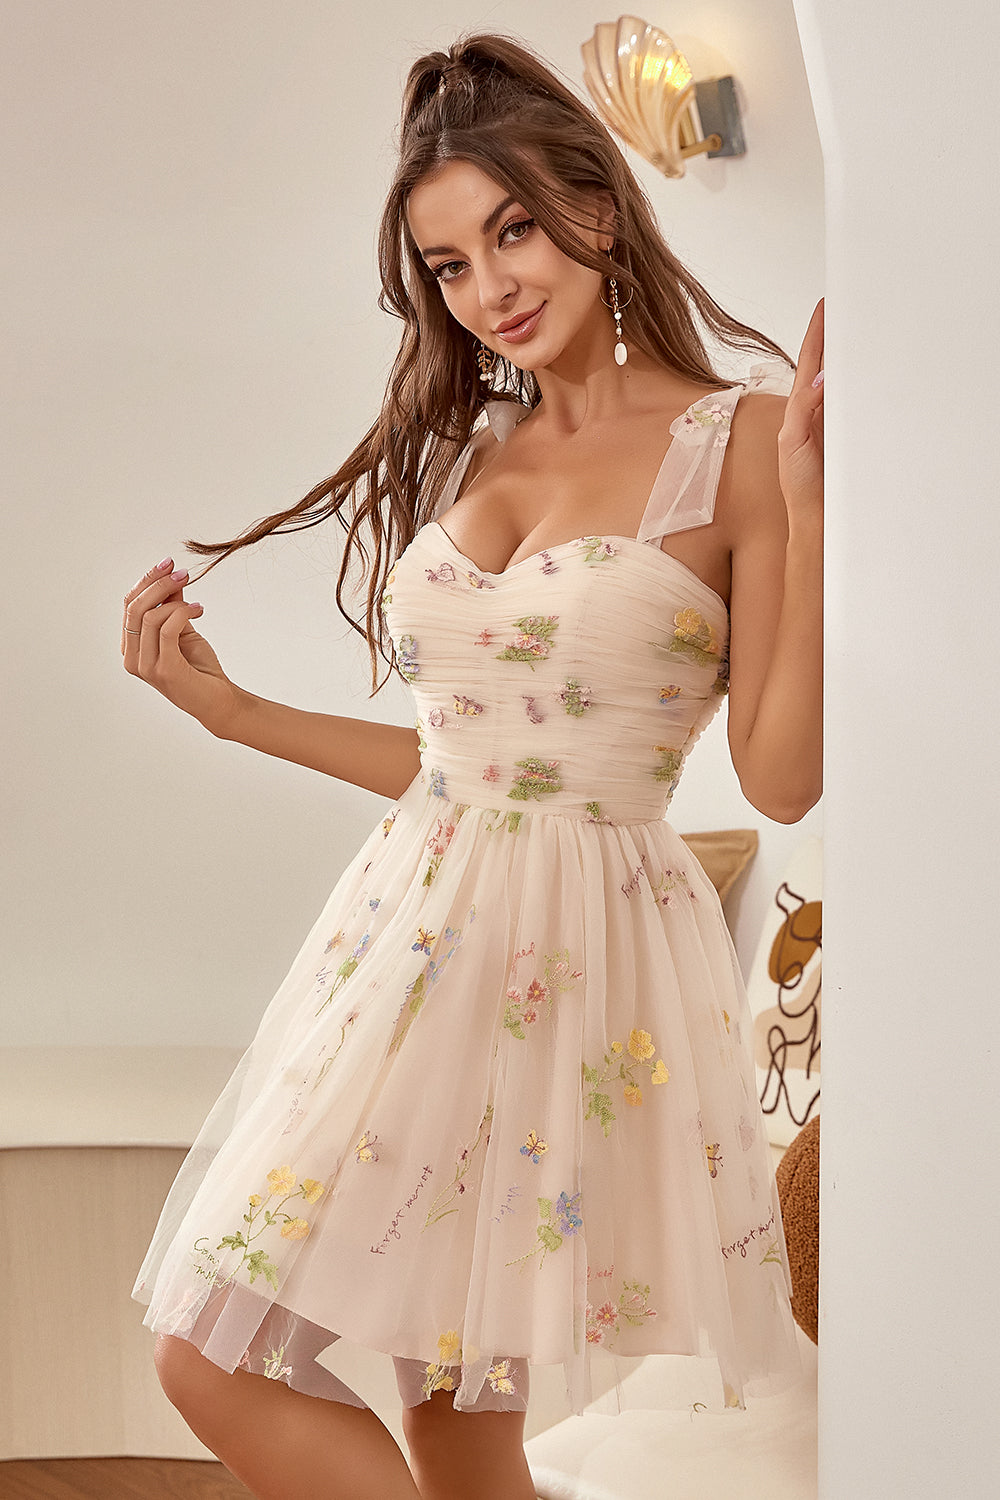 Cute Green A Line Spaghetti Straps Homecoming Dress with Embroidery